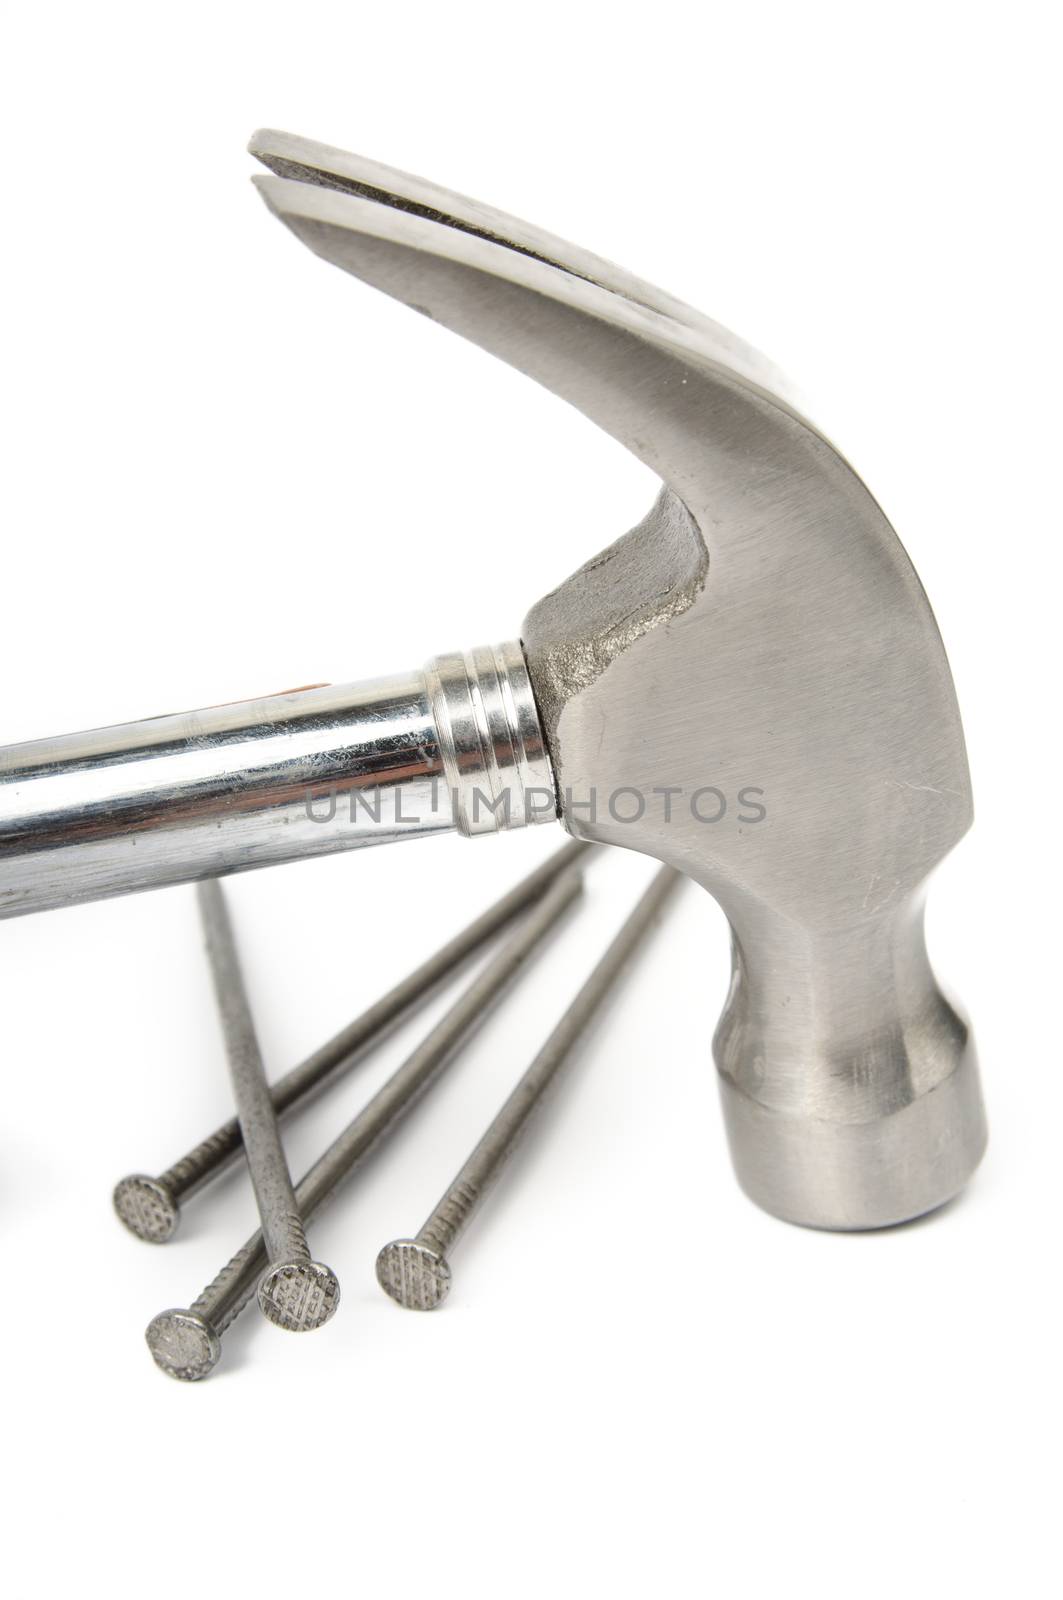 An image of hammer and nails on white